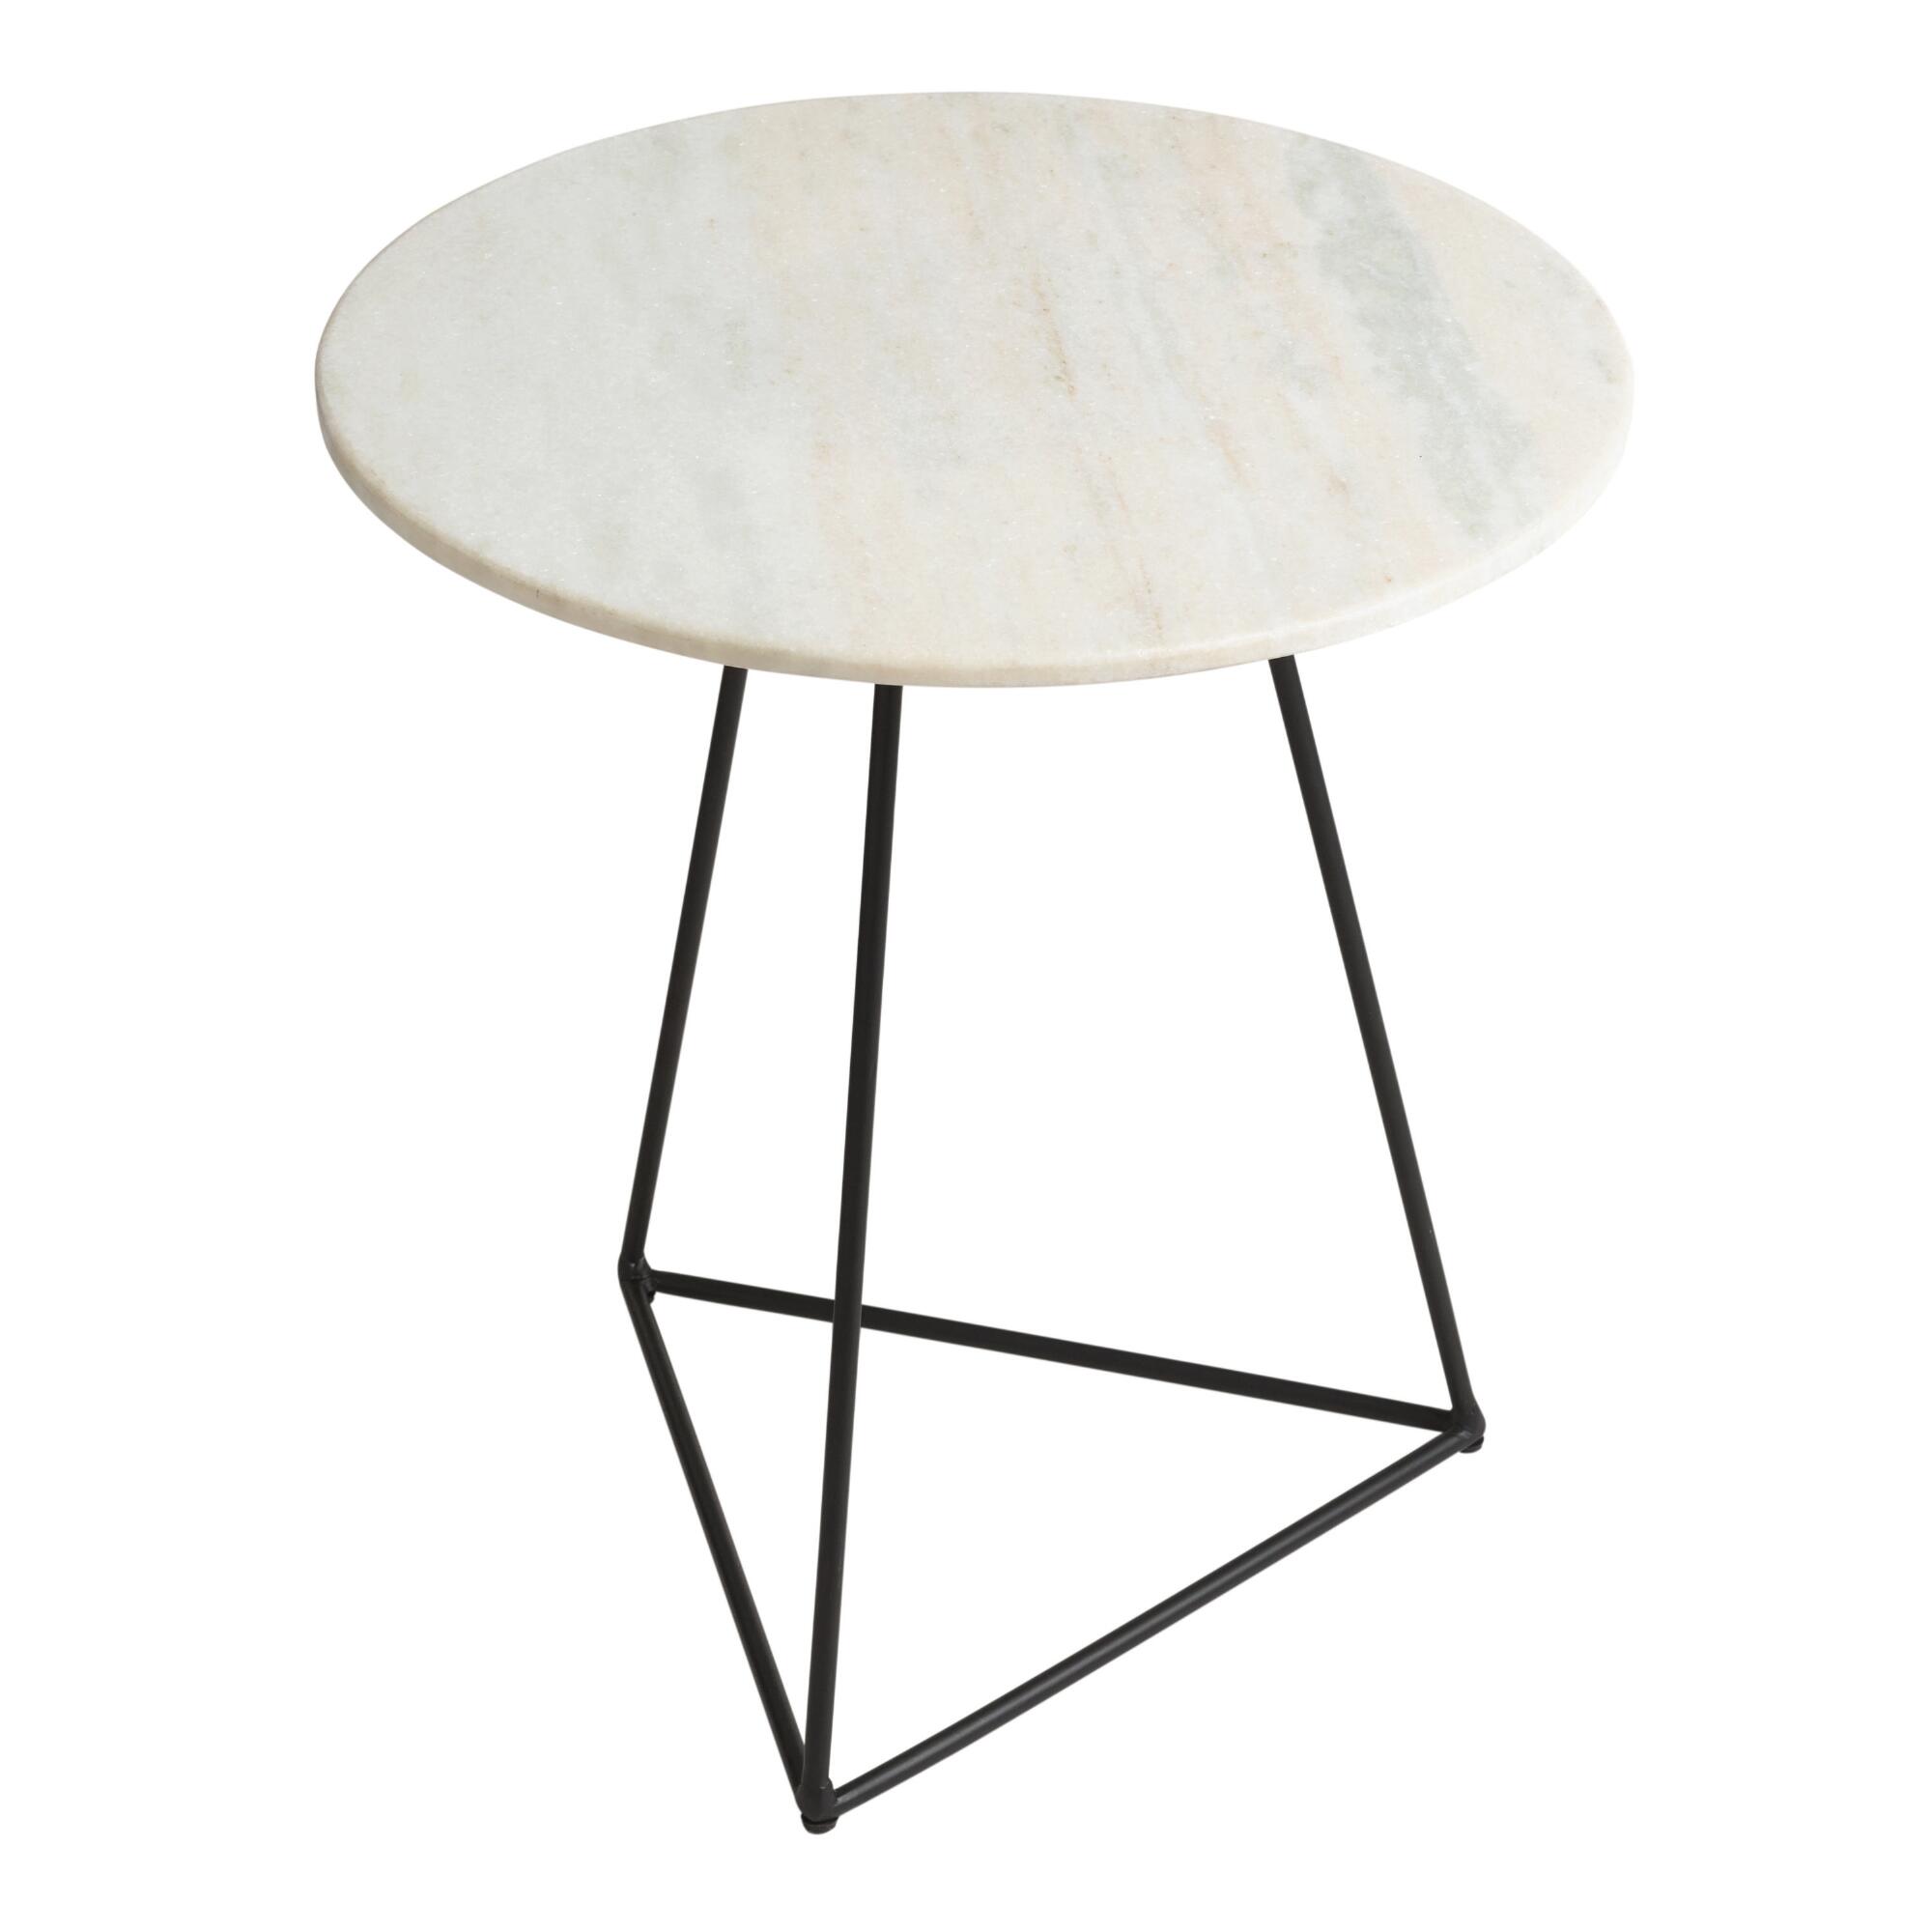 Round White Marble And Metal Accent Table by World Market